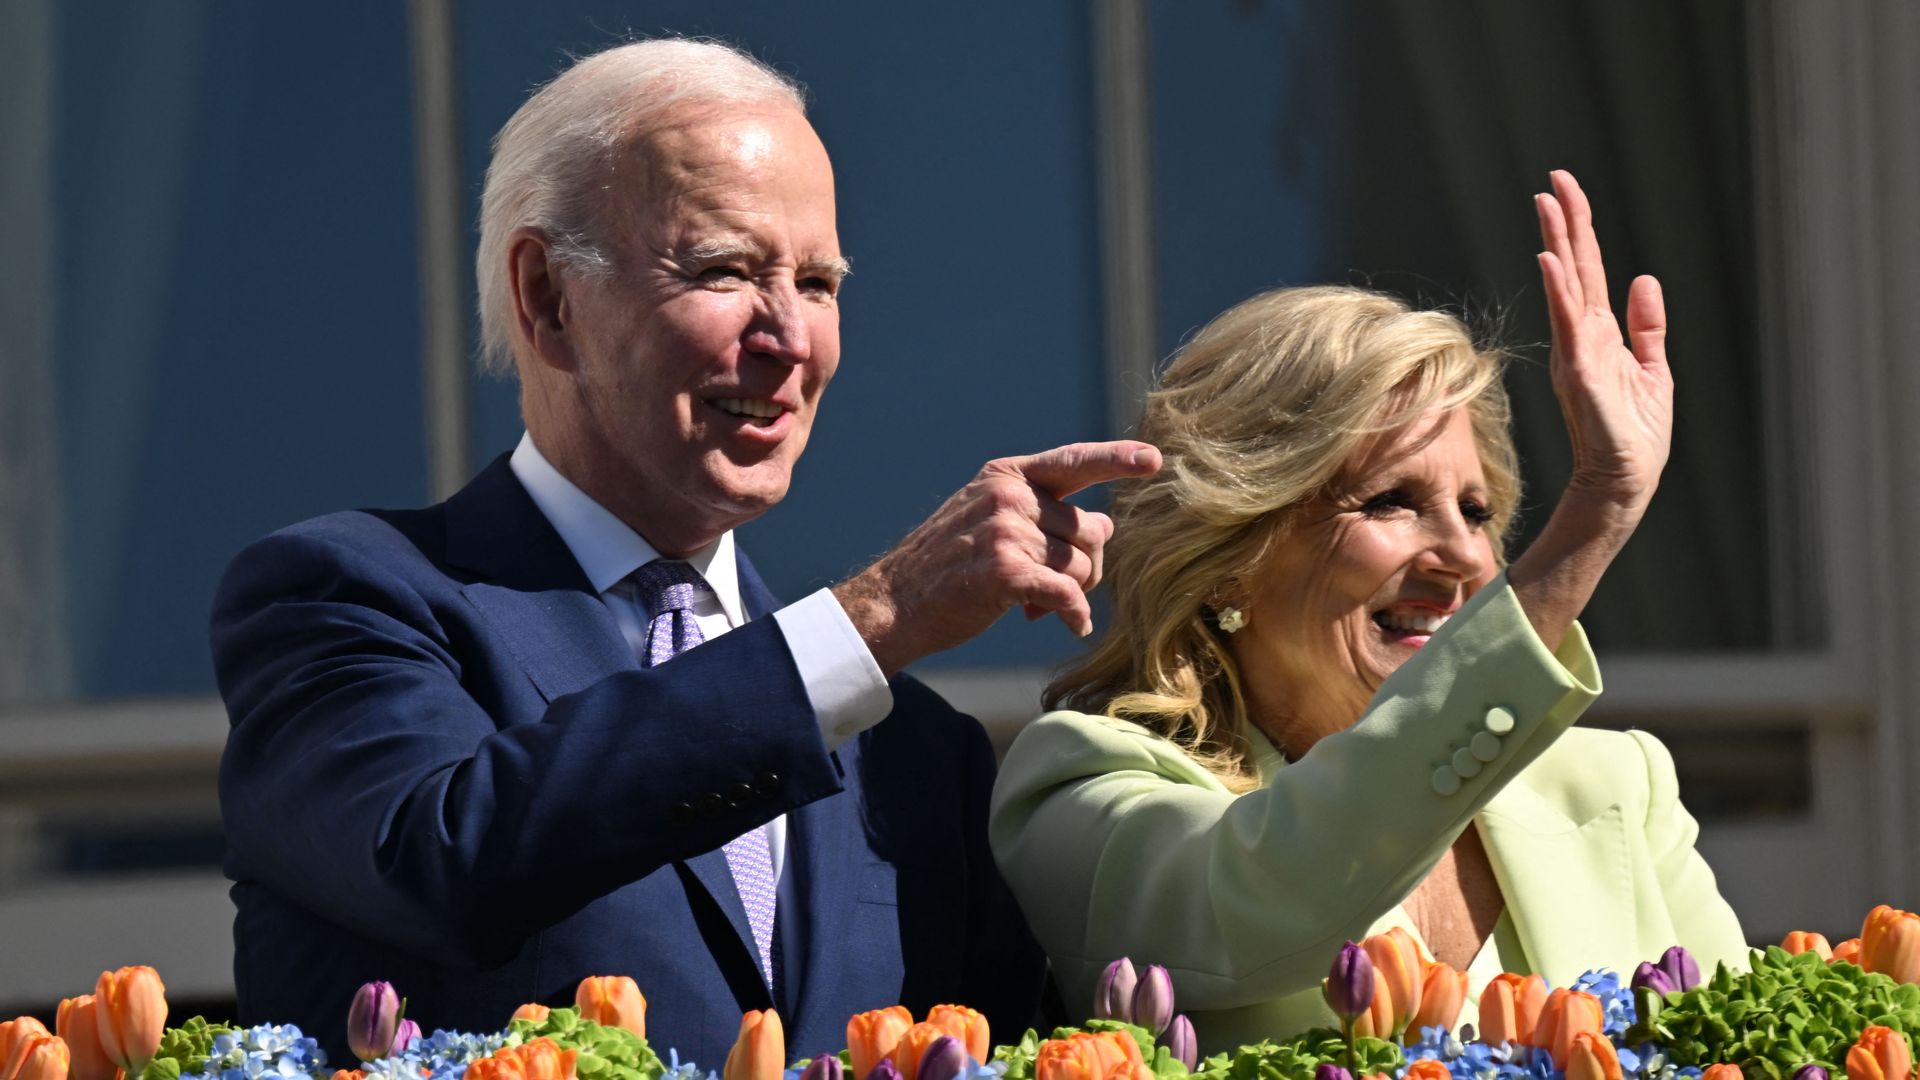 The First Lady Dr. Jill Biden and President Joe Biden waving from the White House